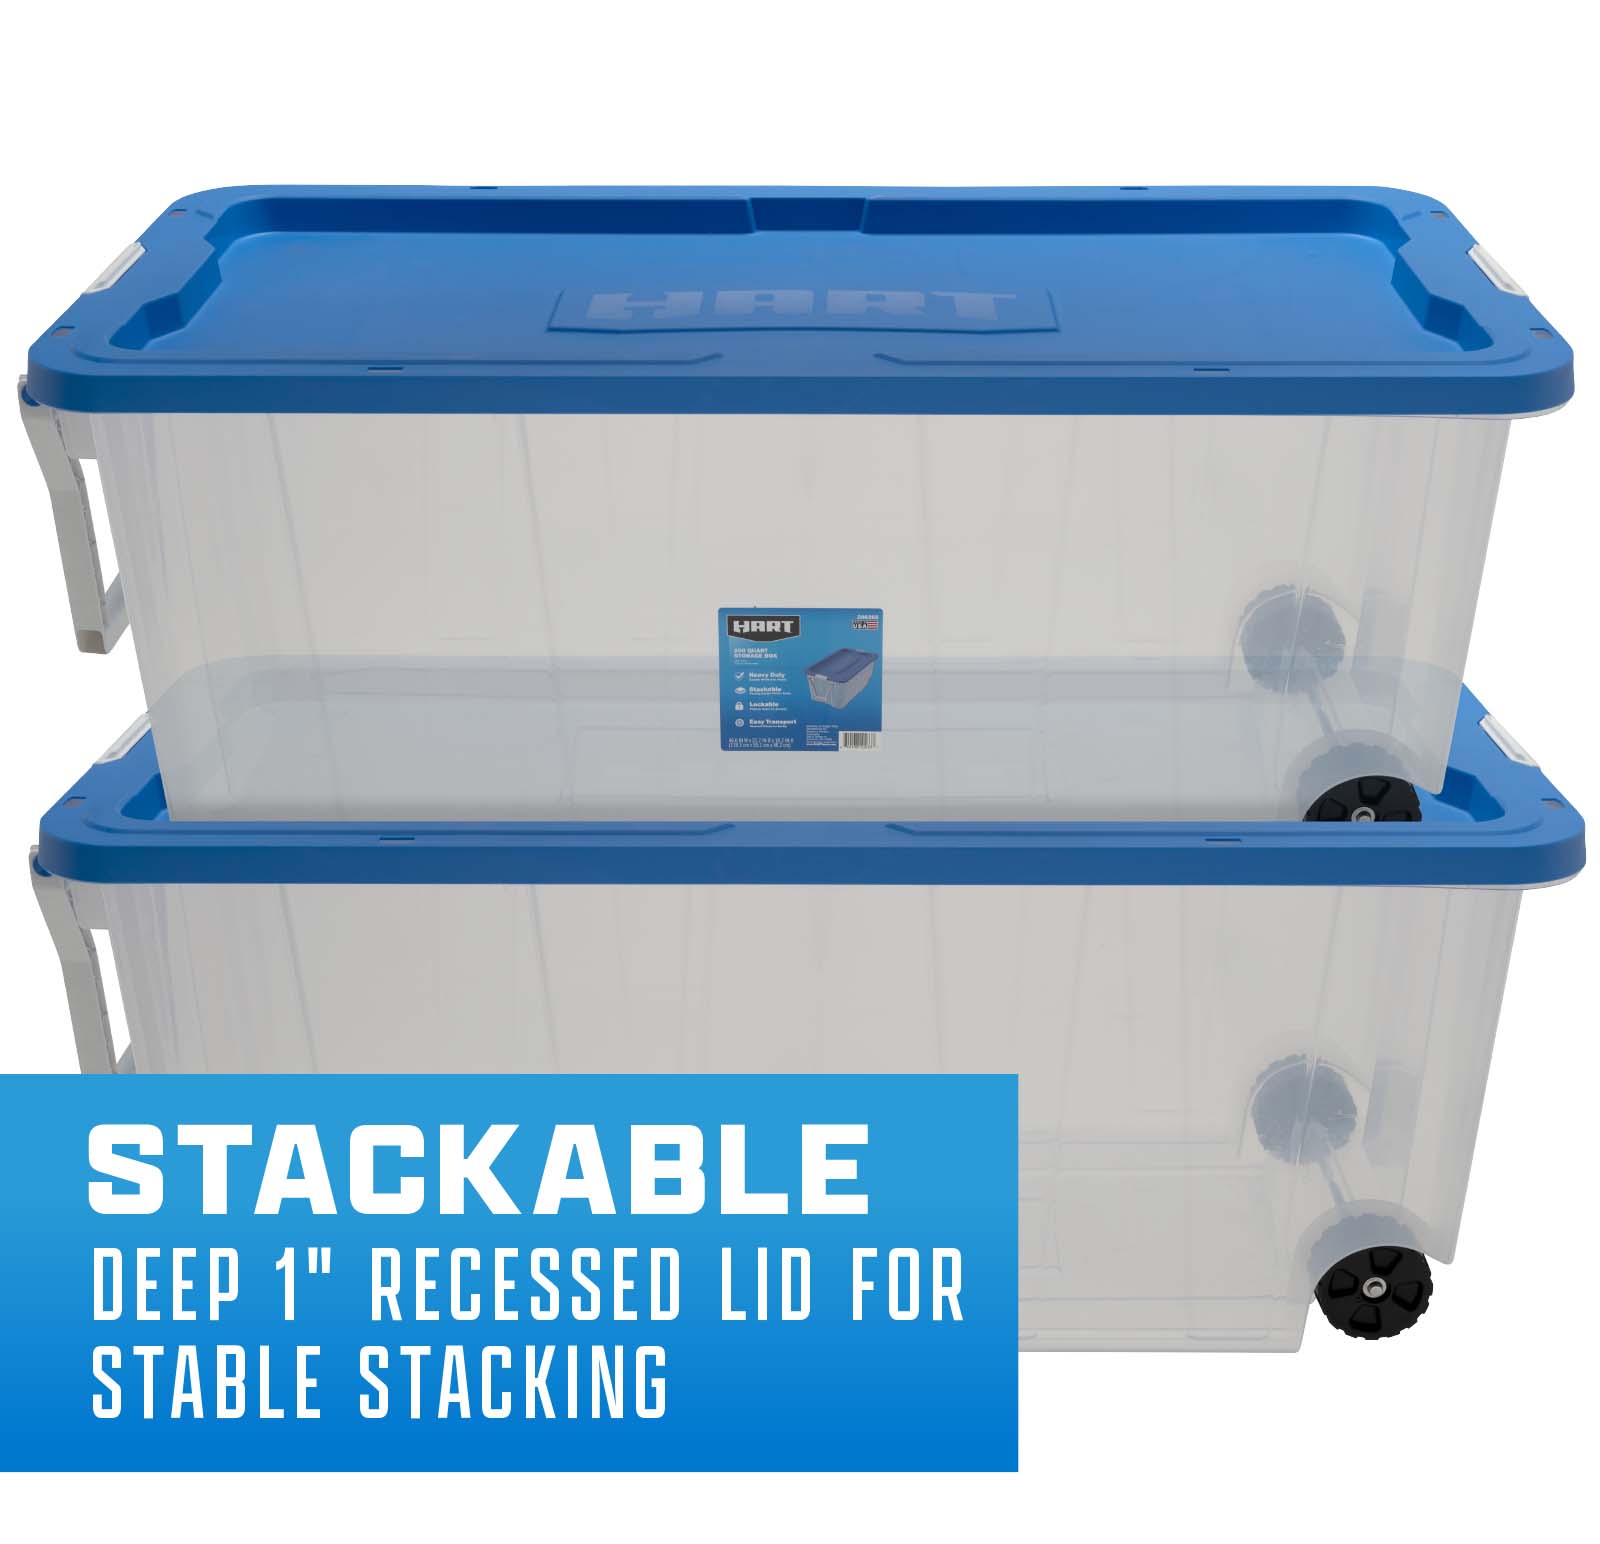 Stackable deep 1" recessed lid for stable stacking